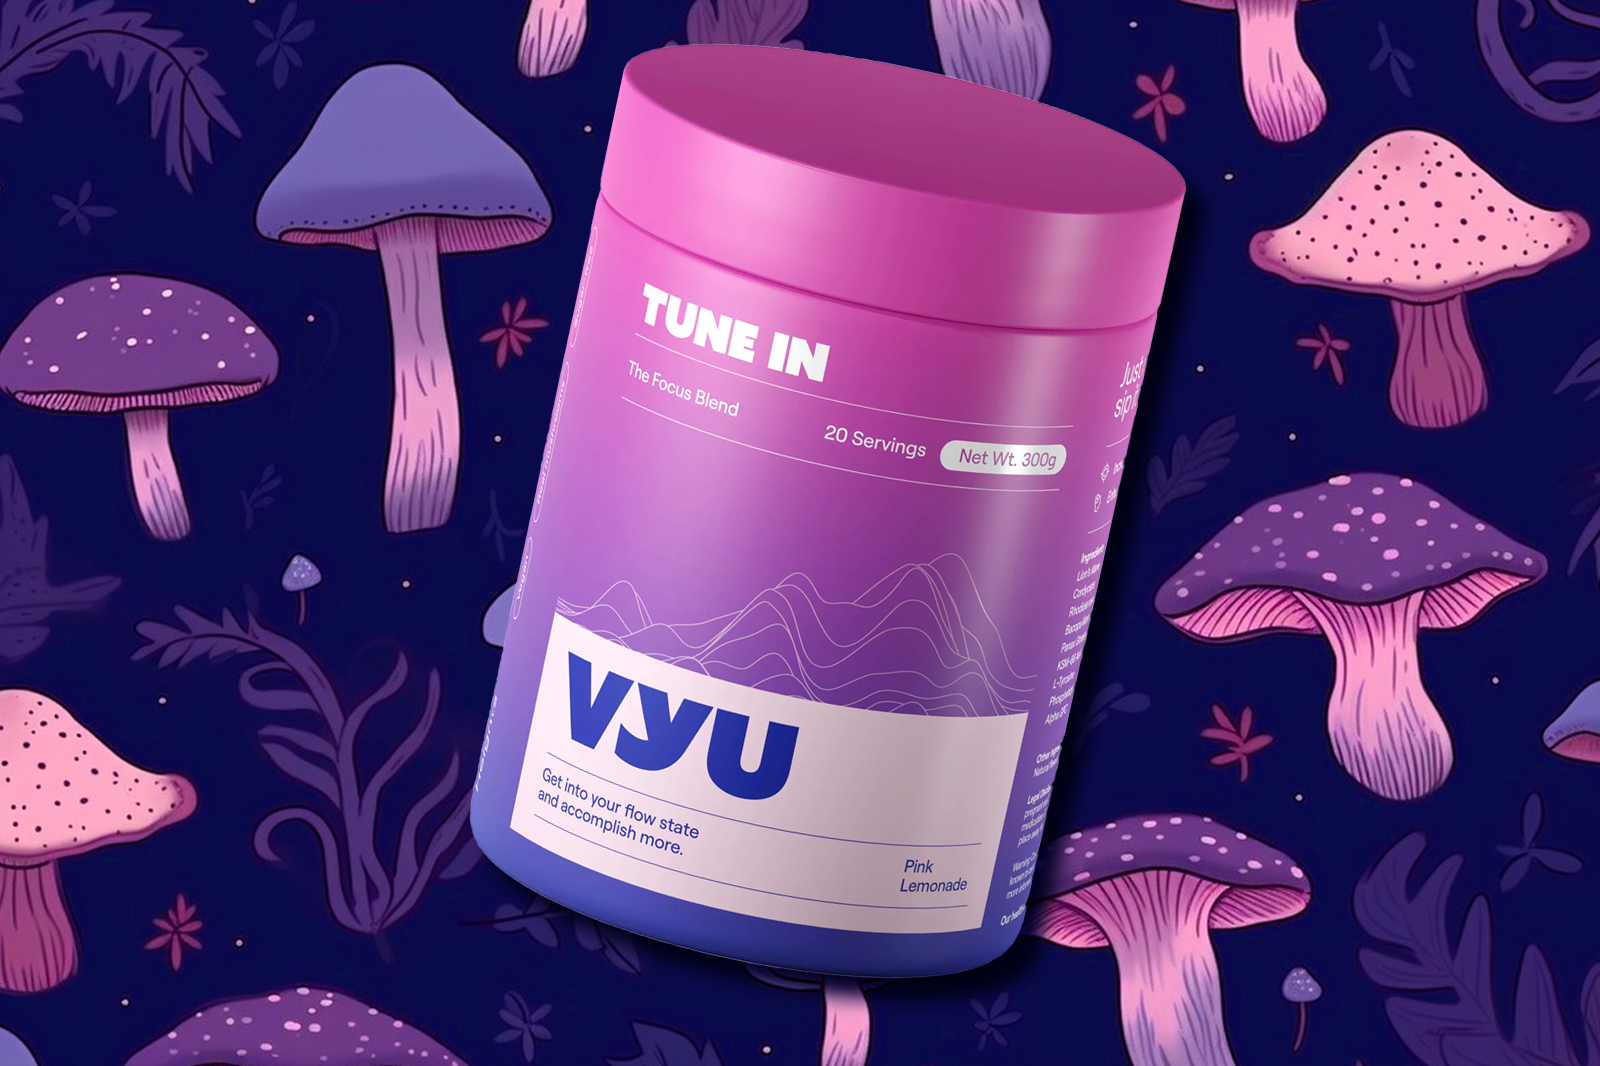 A container of VYU TUNE IN, featuring pink lemonade flavor, is positioned against a violet background adorned with painted mushrooms